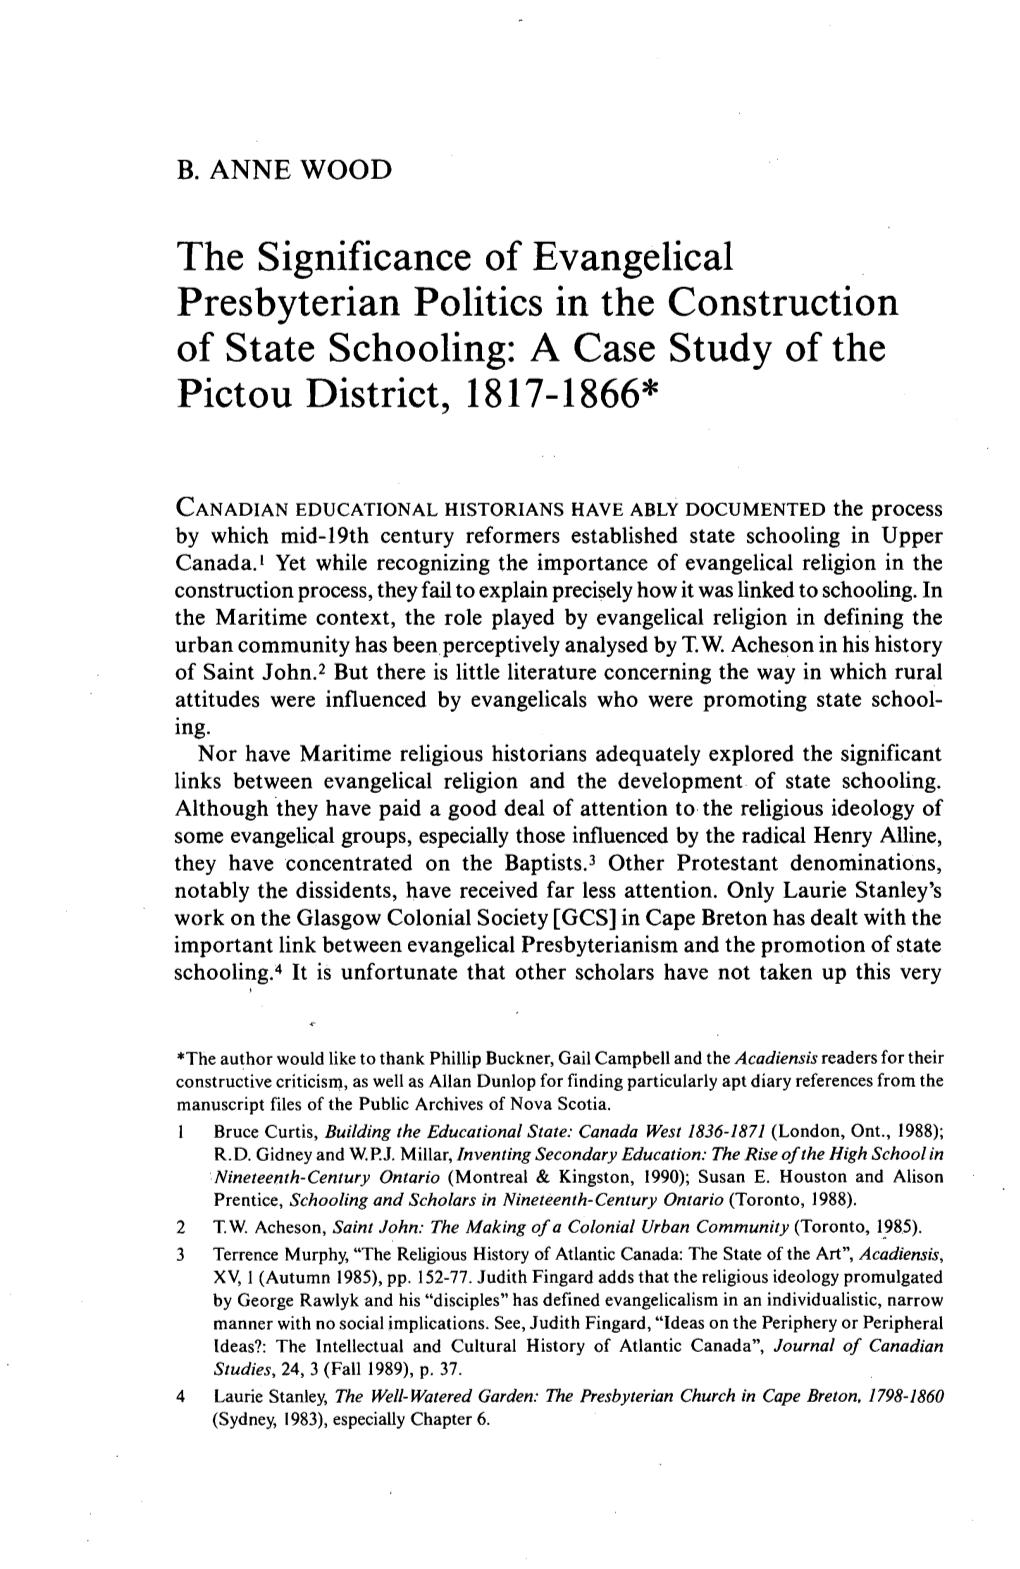 The Significance of Evangelical Presbyterian Politics in the Construction of State Schooling: a Case Study of the Pictou District, 1817-1866*